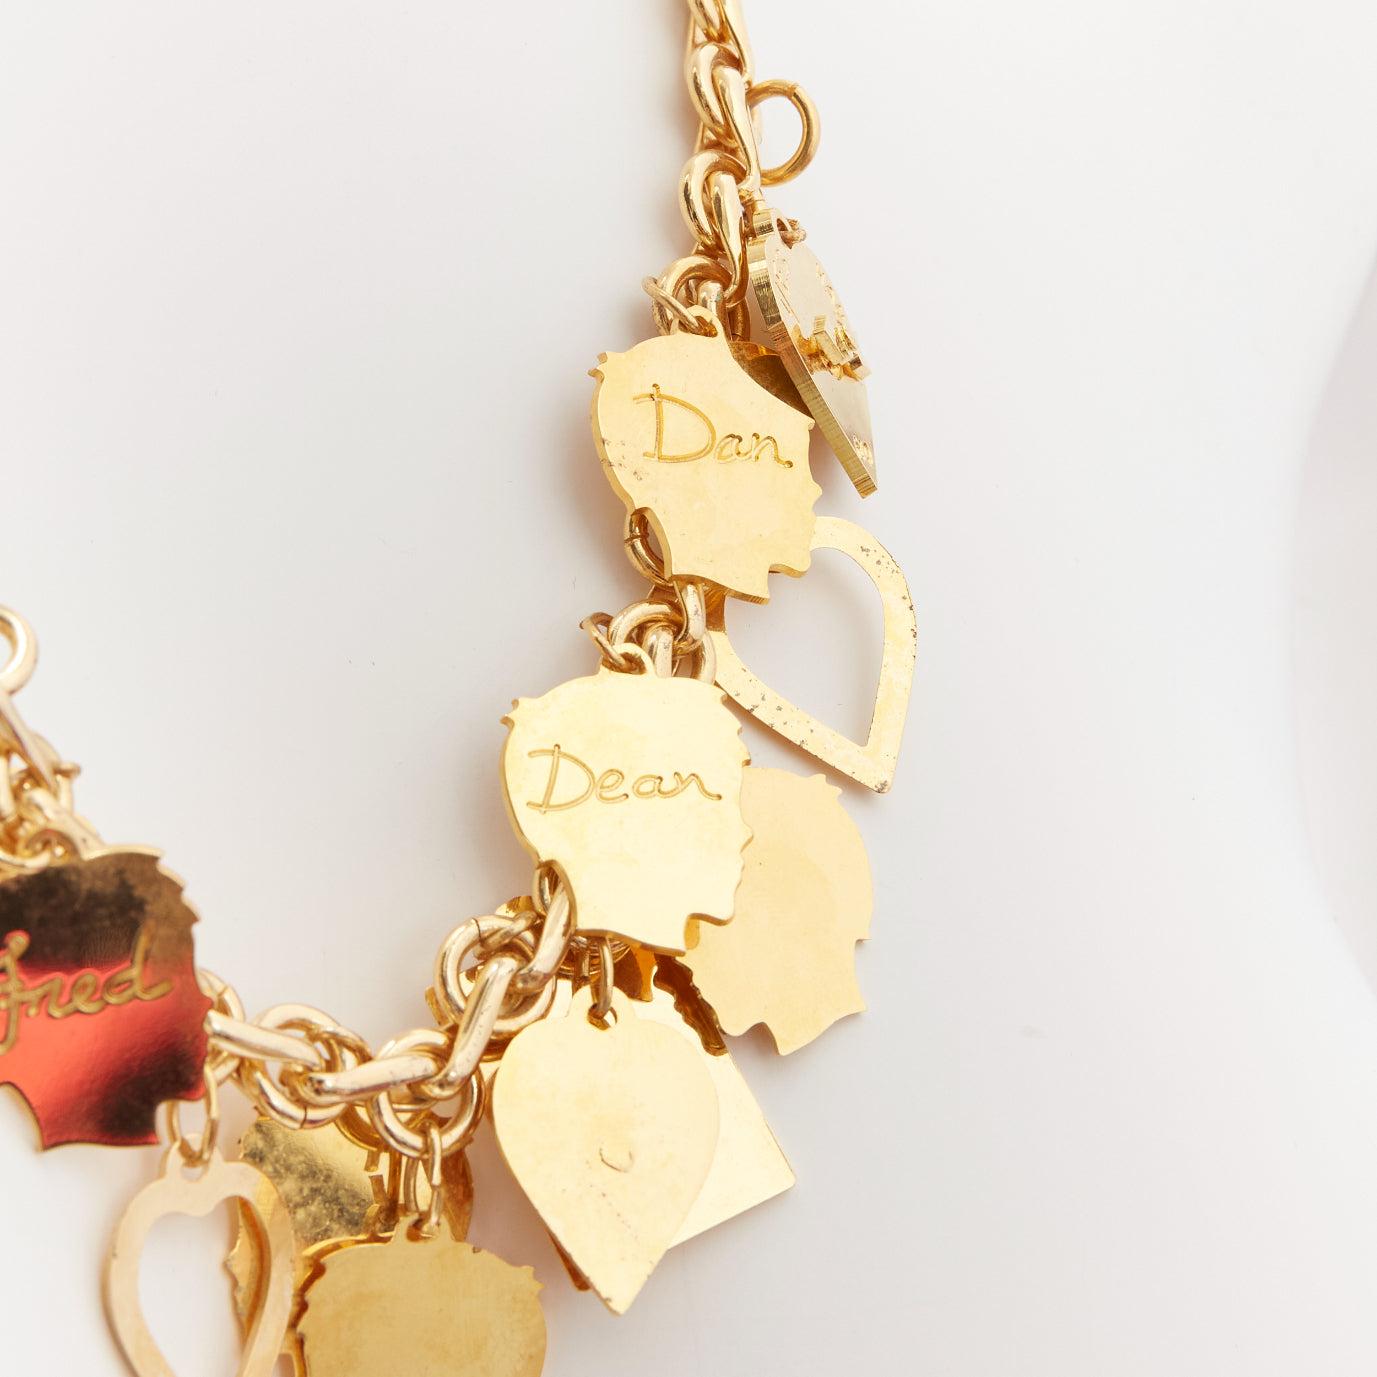 DSQUARED2 Vintage gold-tone Etched Boys Names heart breaker charms princess necklace
Reference: ANWU/A01080
Brand: Dsquared2
Material: Metal
Color: Gold
Pattern: Solid
Closure: Pullover
Lining: Gold Metal
Extra Details: D2 logo at heart charm. Boys